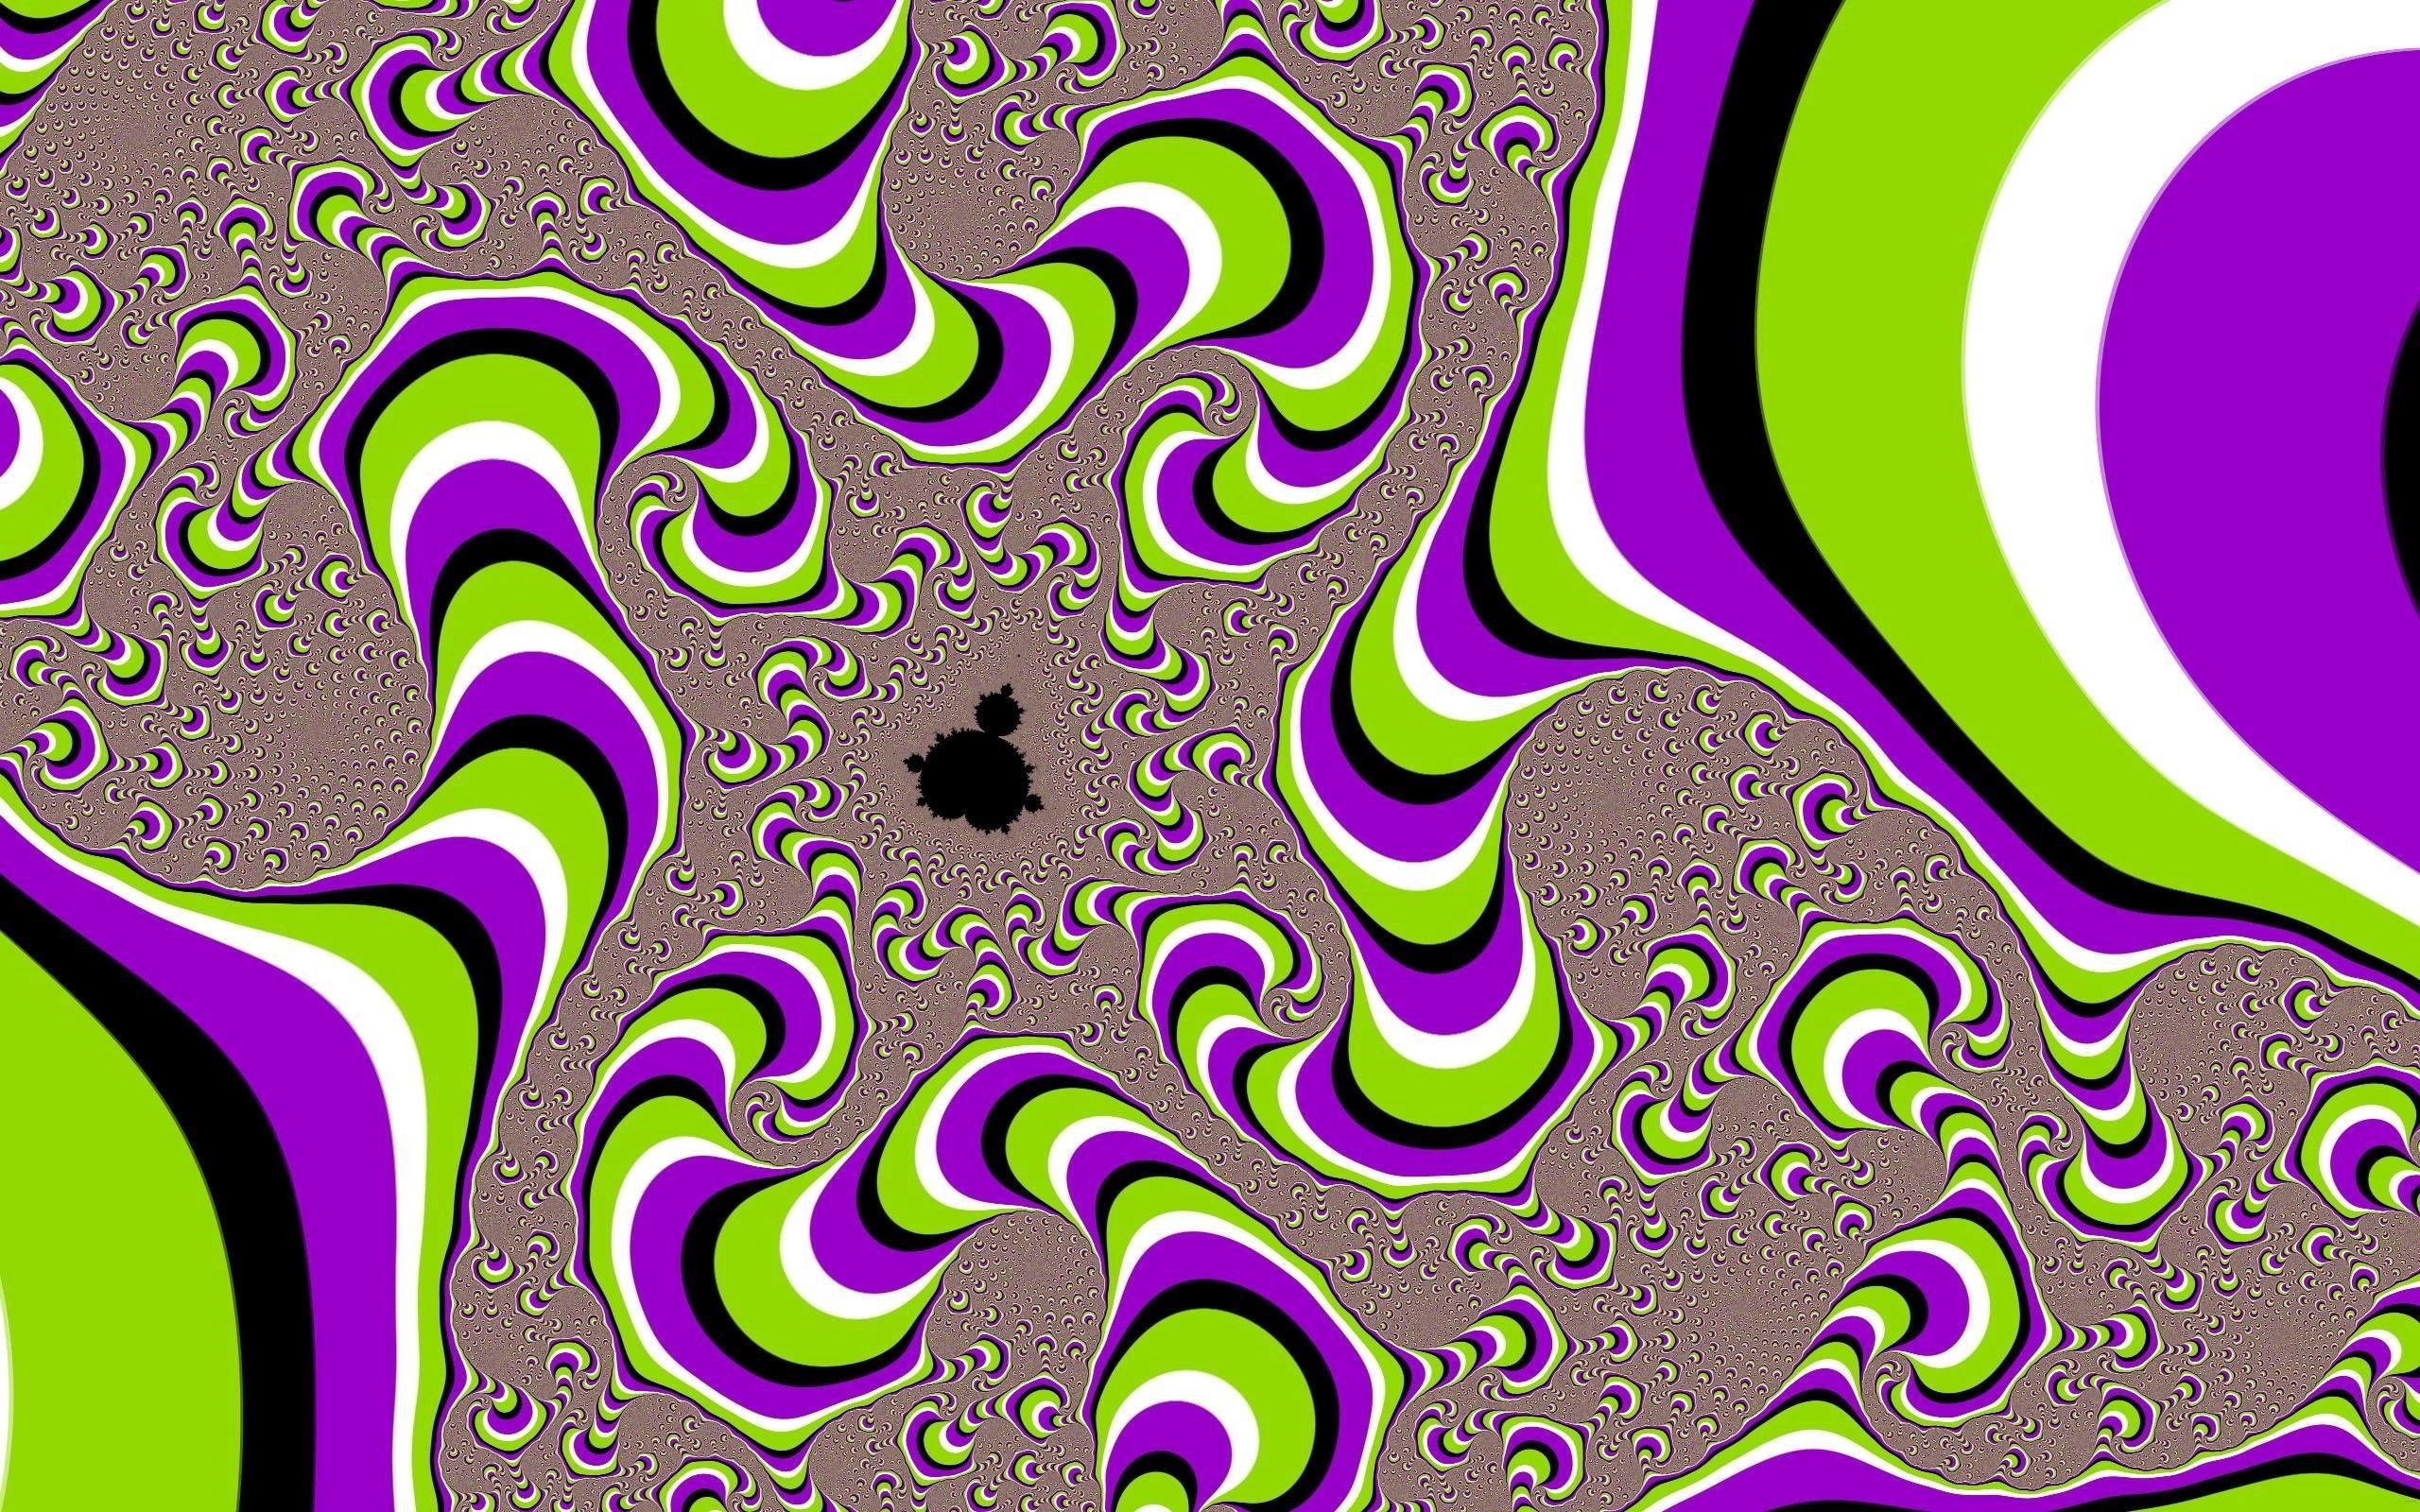 Optical illusion, Cool visual effects, Abstract wallpapers, 2560x1600 HD Desktop